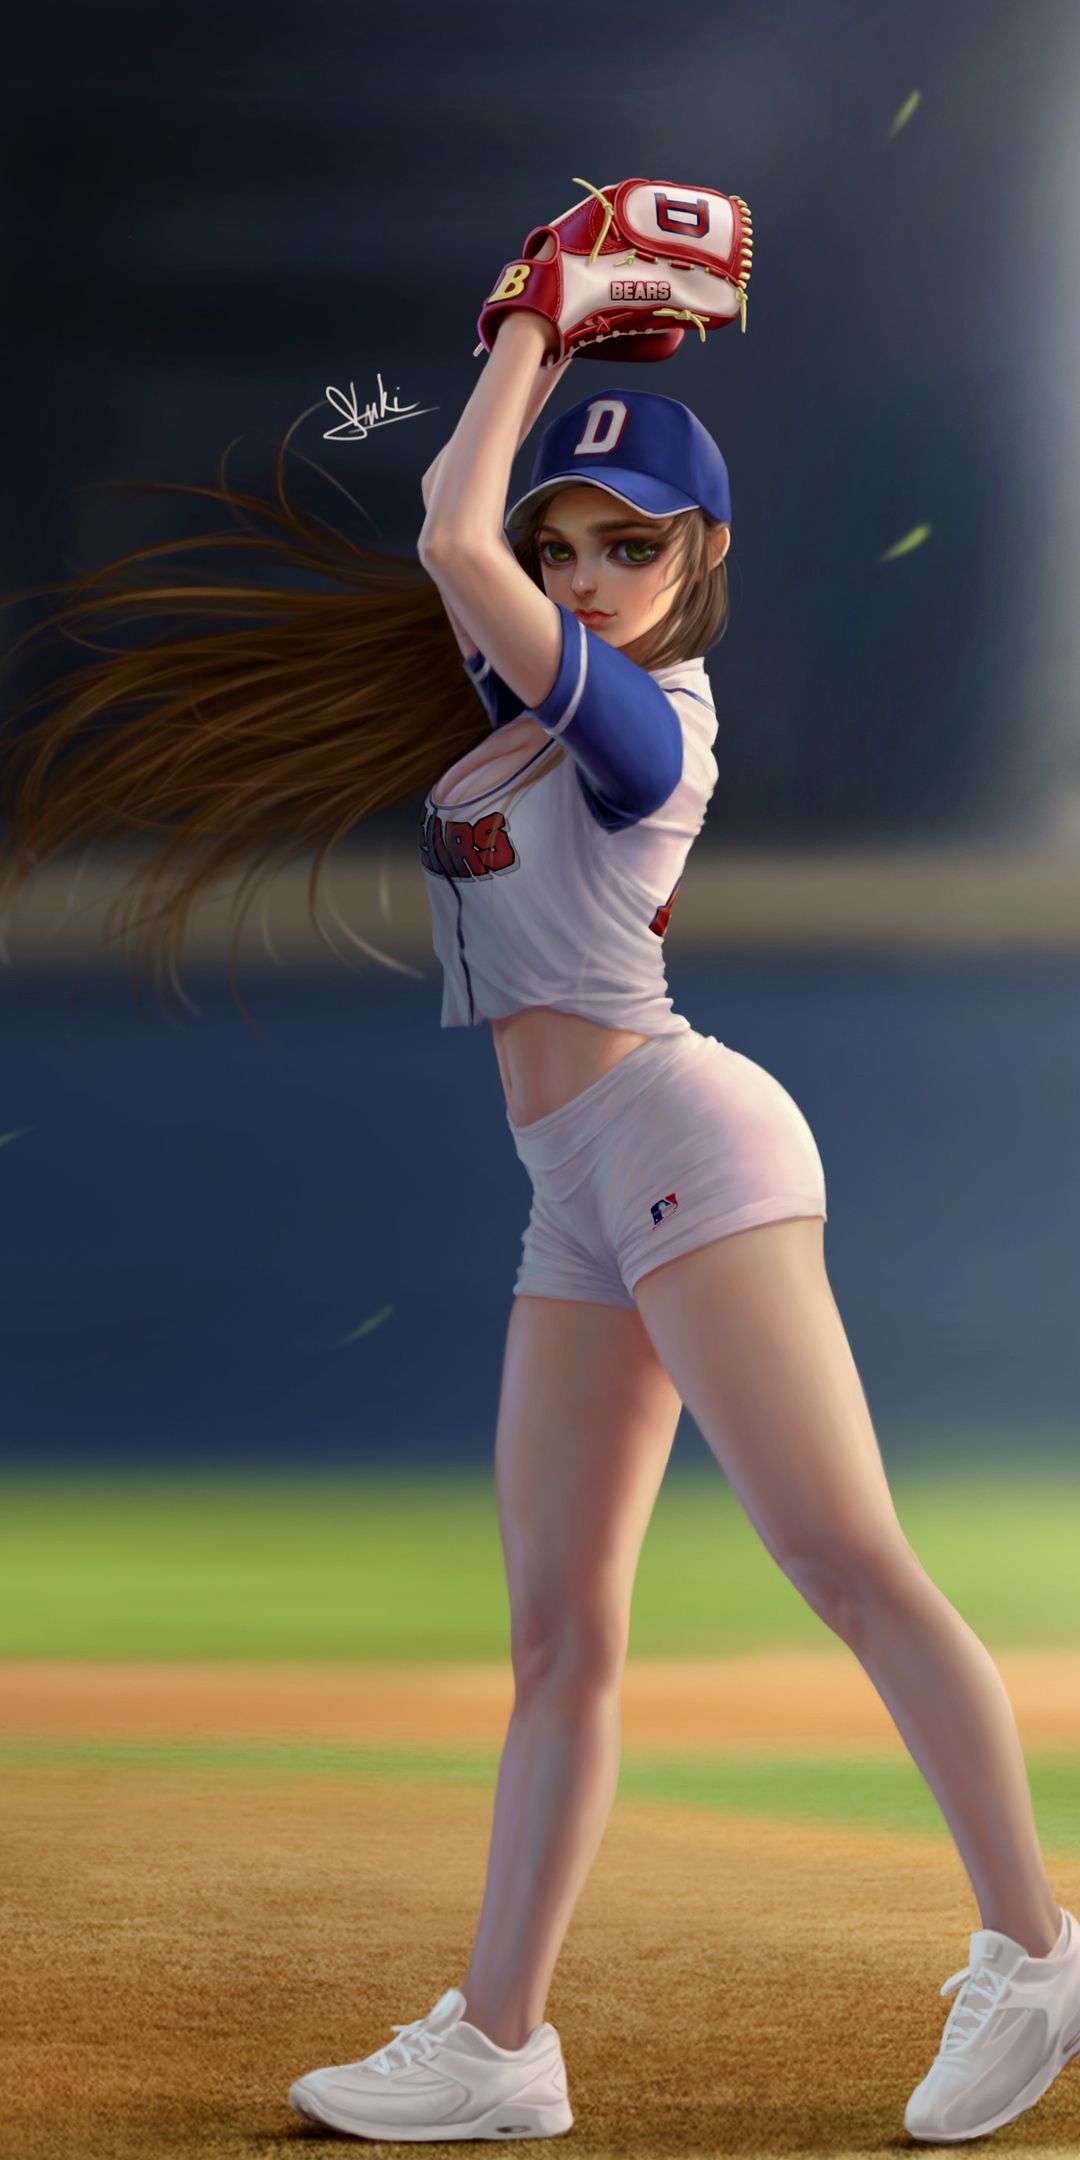 Baseball Girl One Plus 5T, Honor 7x, Honor view Lg Q6 HD 4k Wallpaper, Image, Background, Photo and Picture